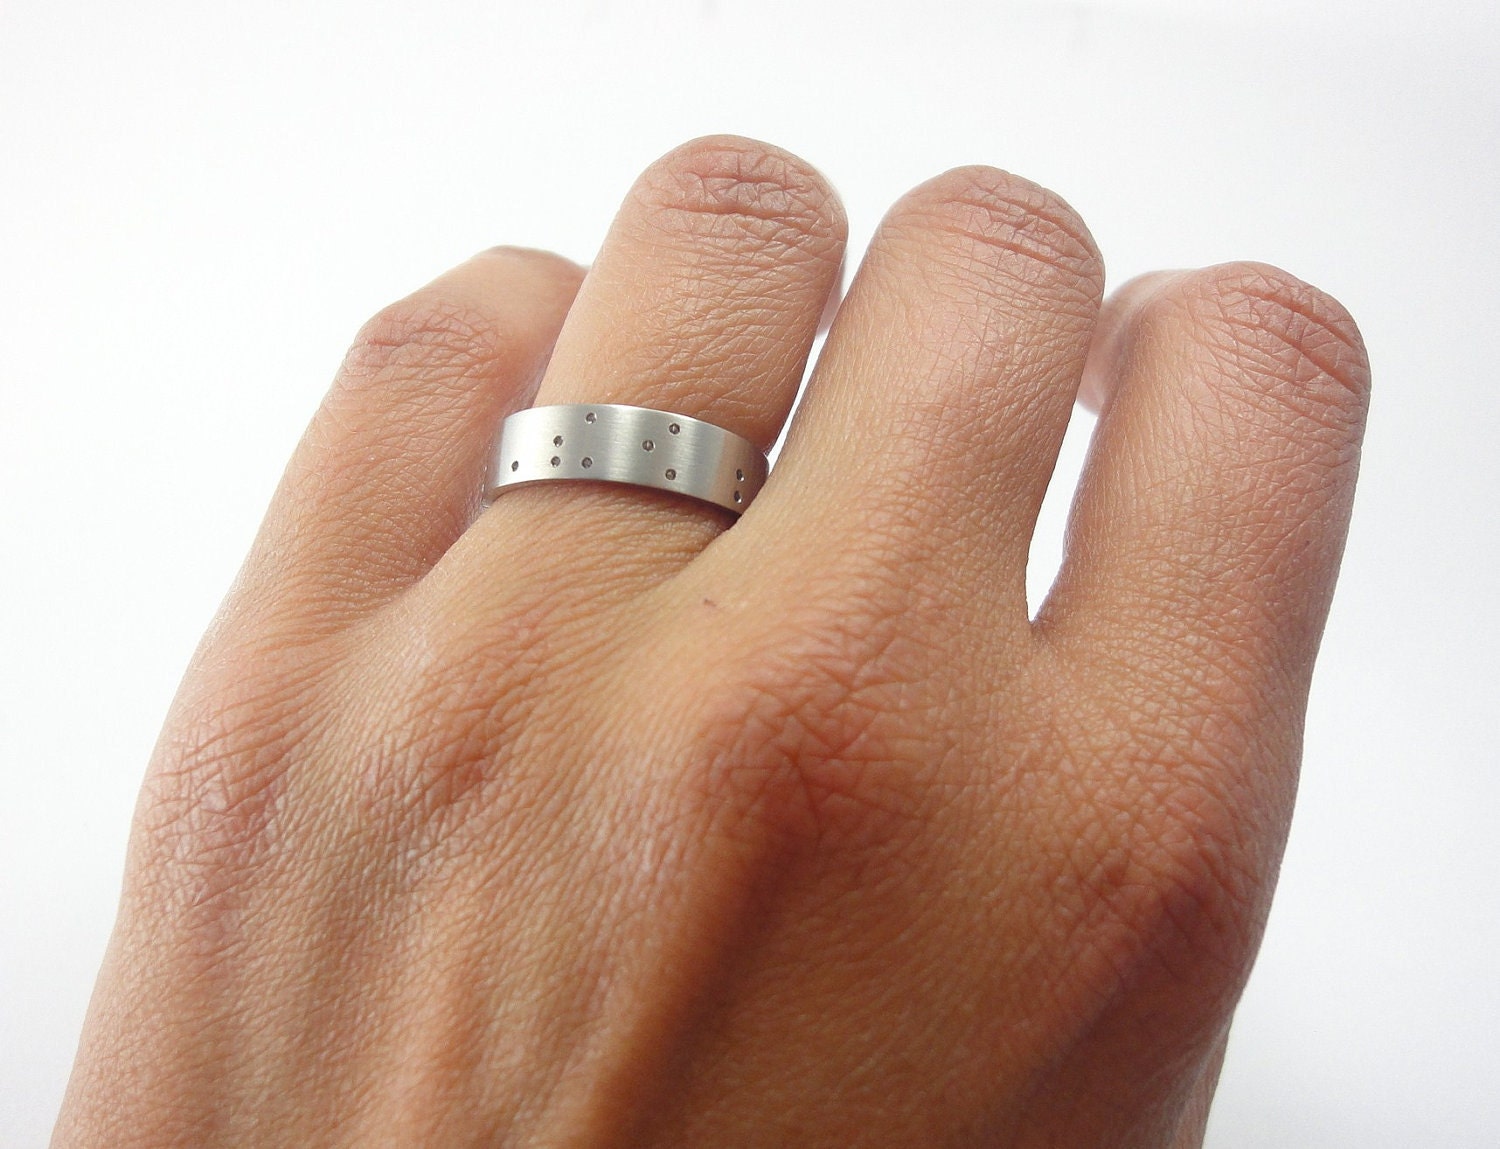 Ring pair "Love is blind" -Braille wedding bands, MADE TO ORDER